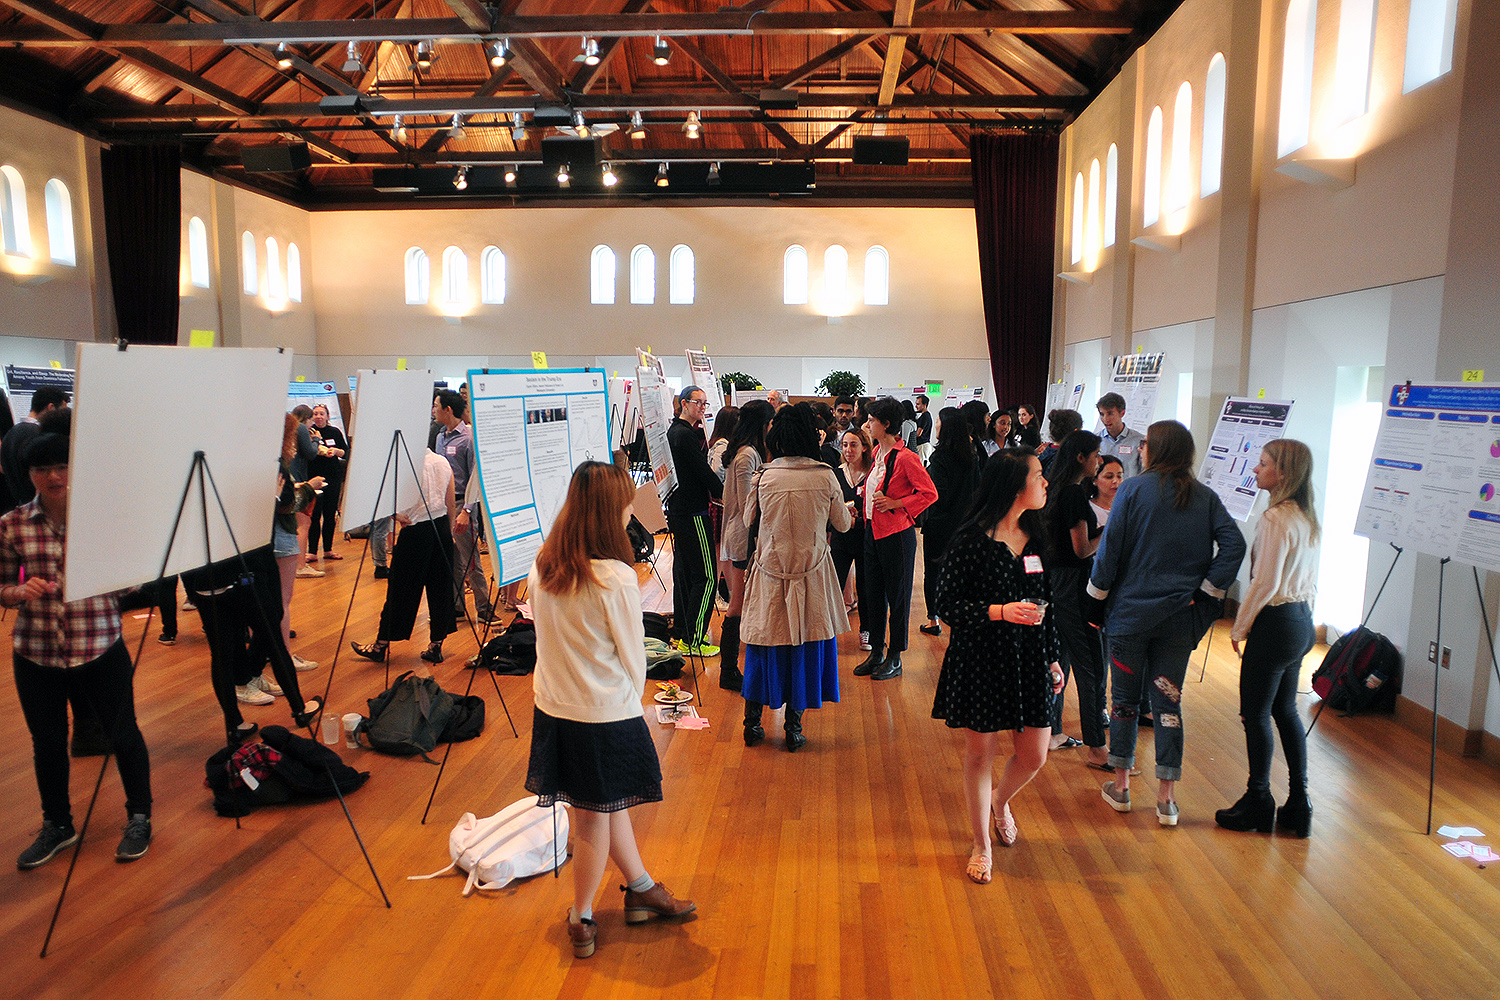 The Psychology Department hosted a research poster presentation April 27 in Beckham Hall. More than 102 students presented 46 posters.